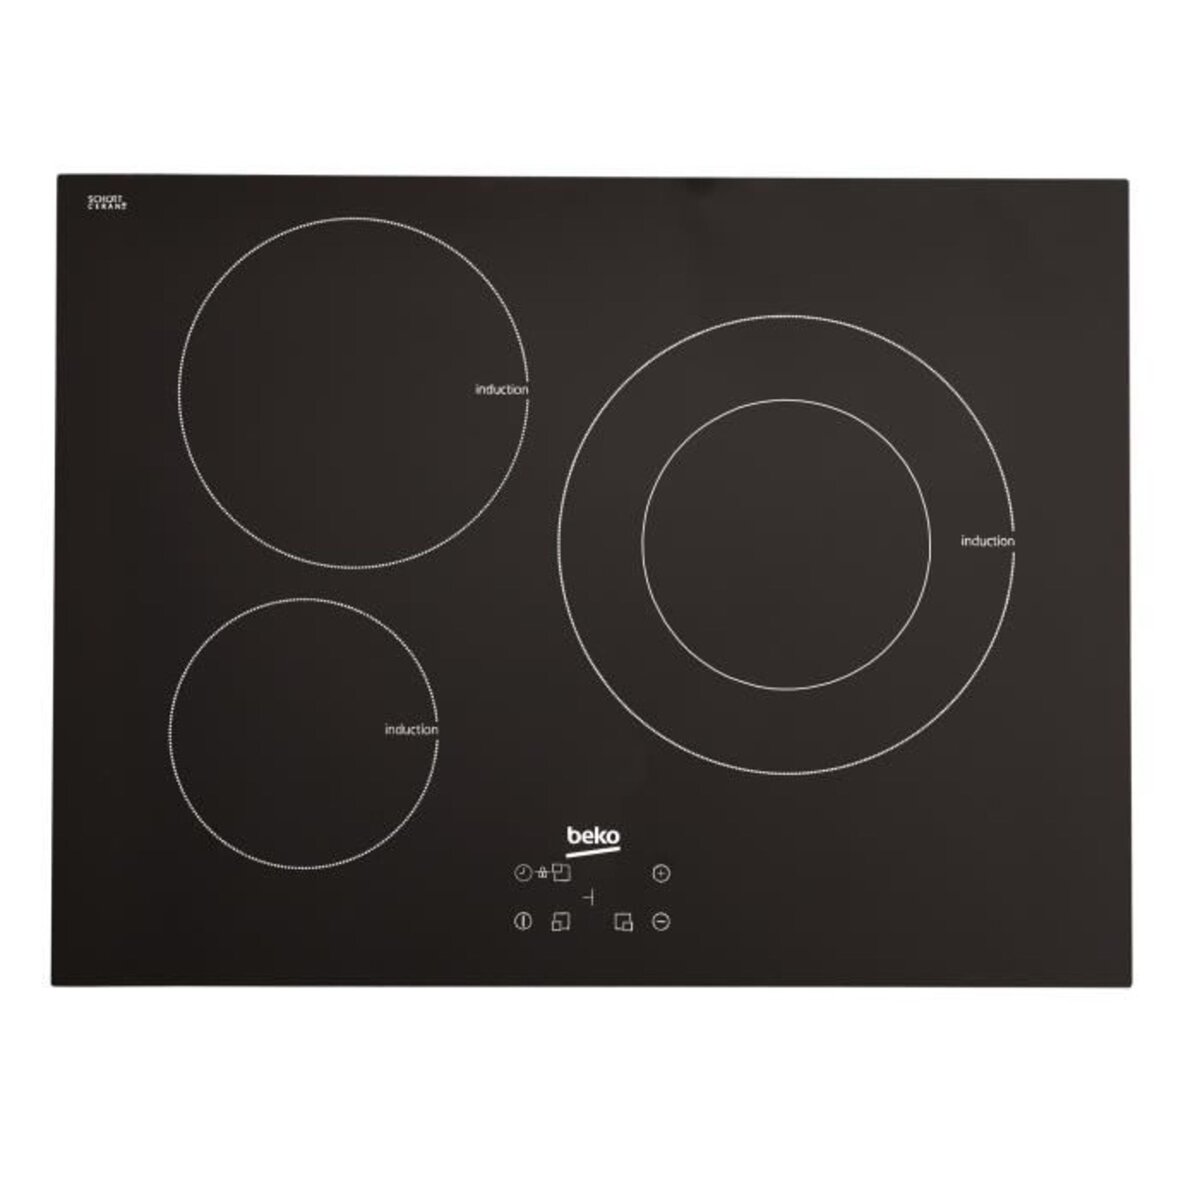 BEKO Table de cuisson à induction HII 73402 AT, 70 cm, 3 foyers dont 1 duo